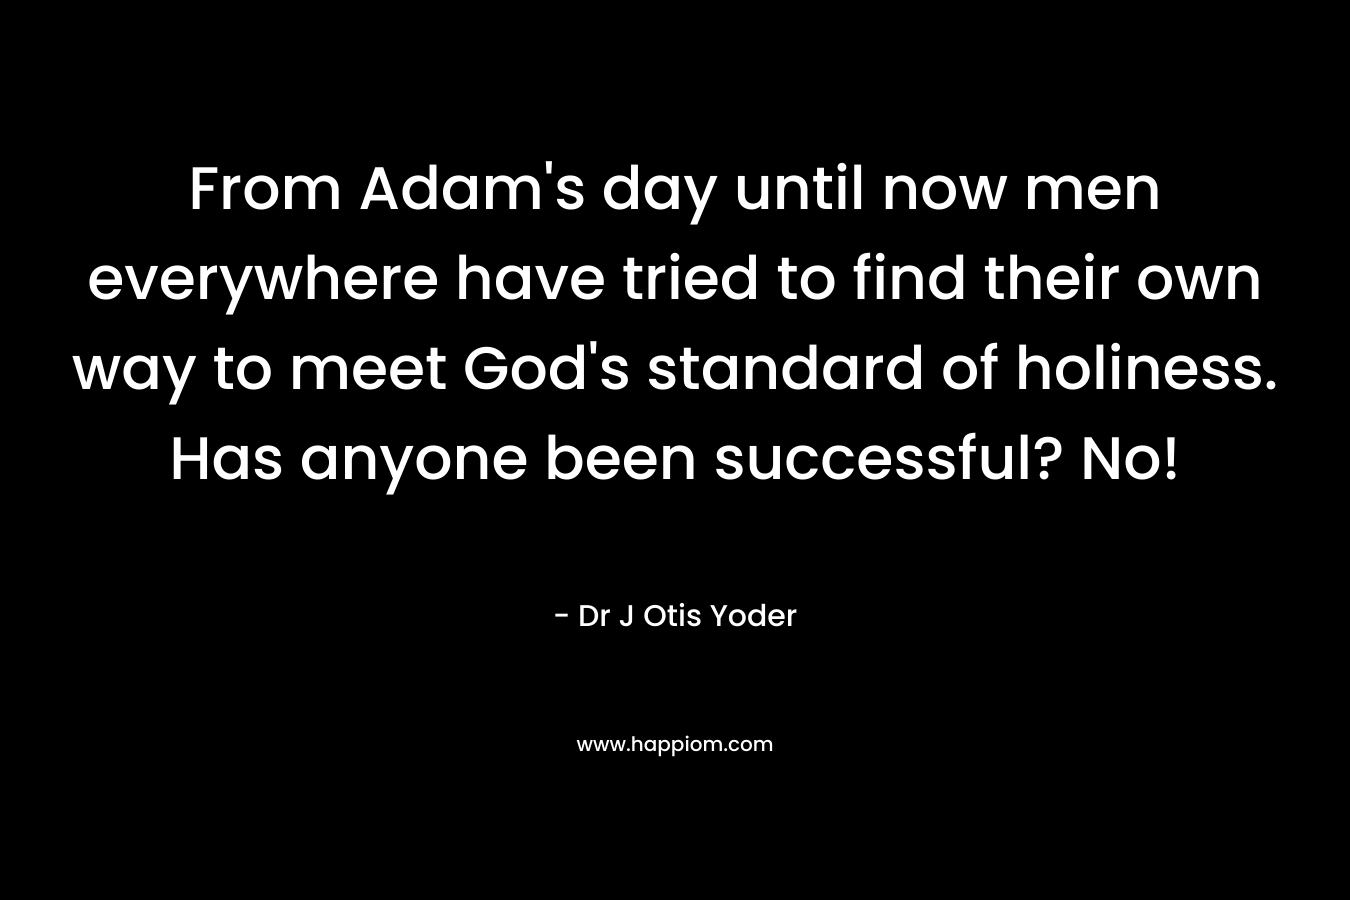 From Adam’s day until now men everywhere have tried to find their own way to meet God’s standard of holiness. Has anyone been successful? No! – Dr J Otis Yoder